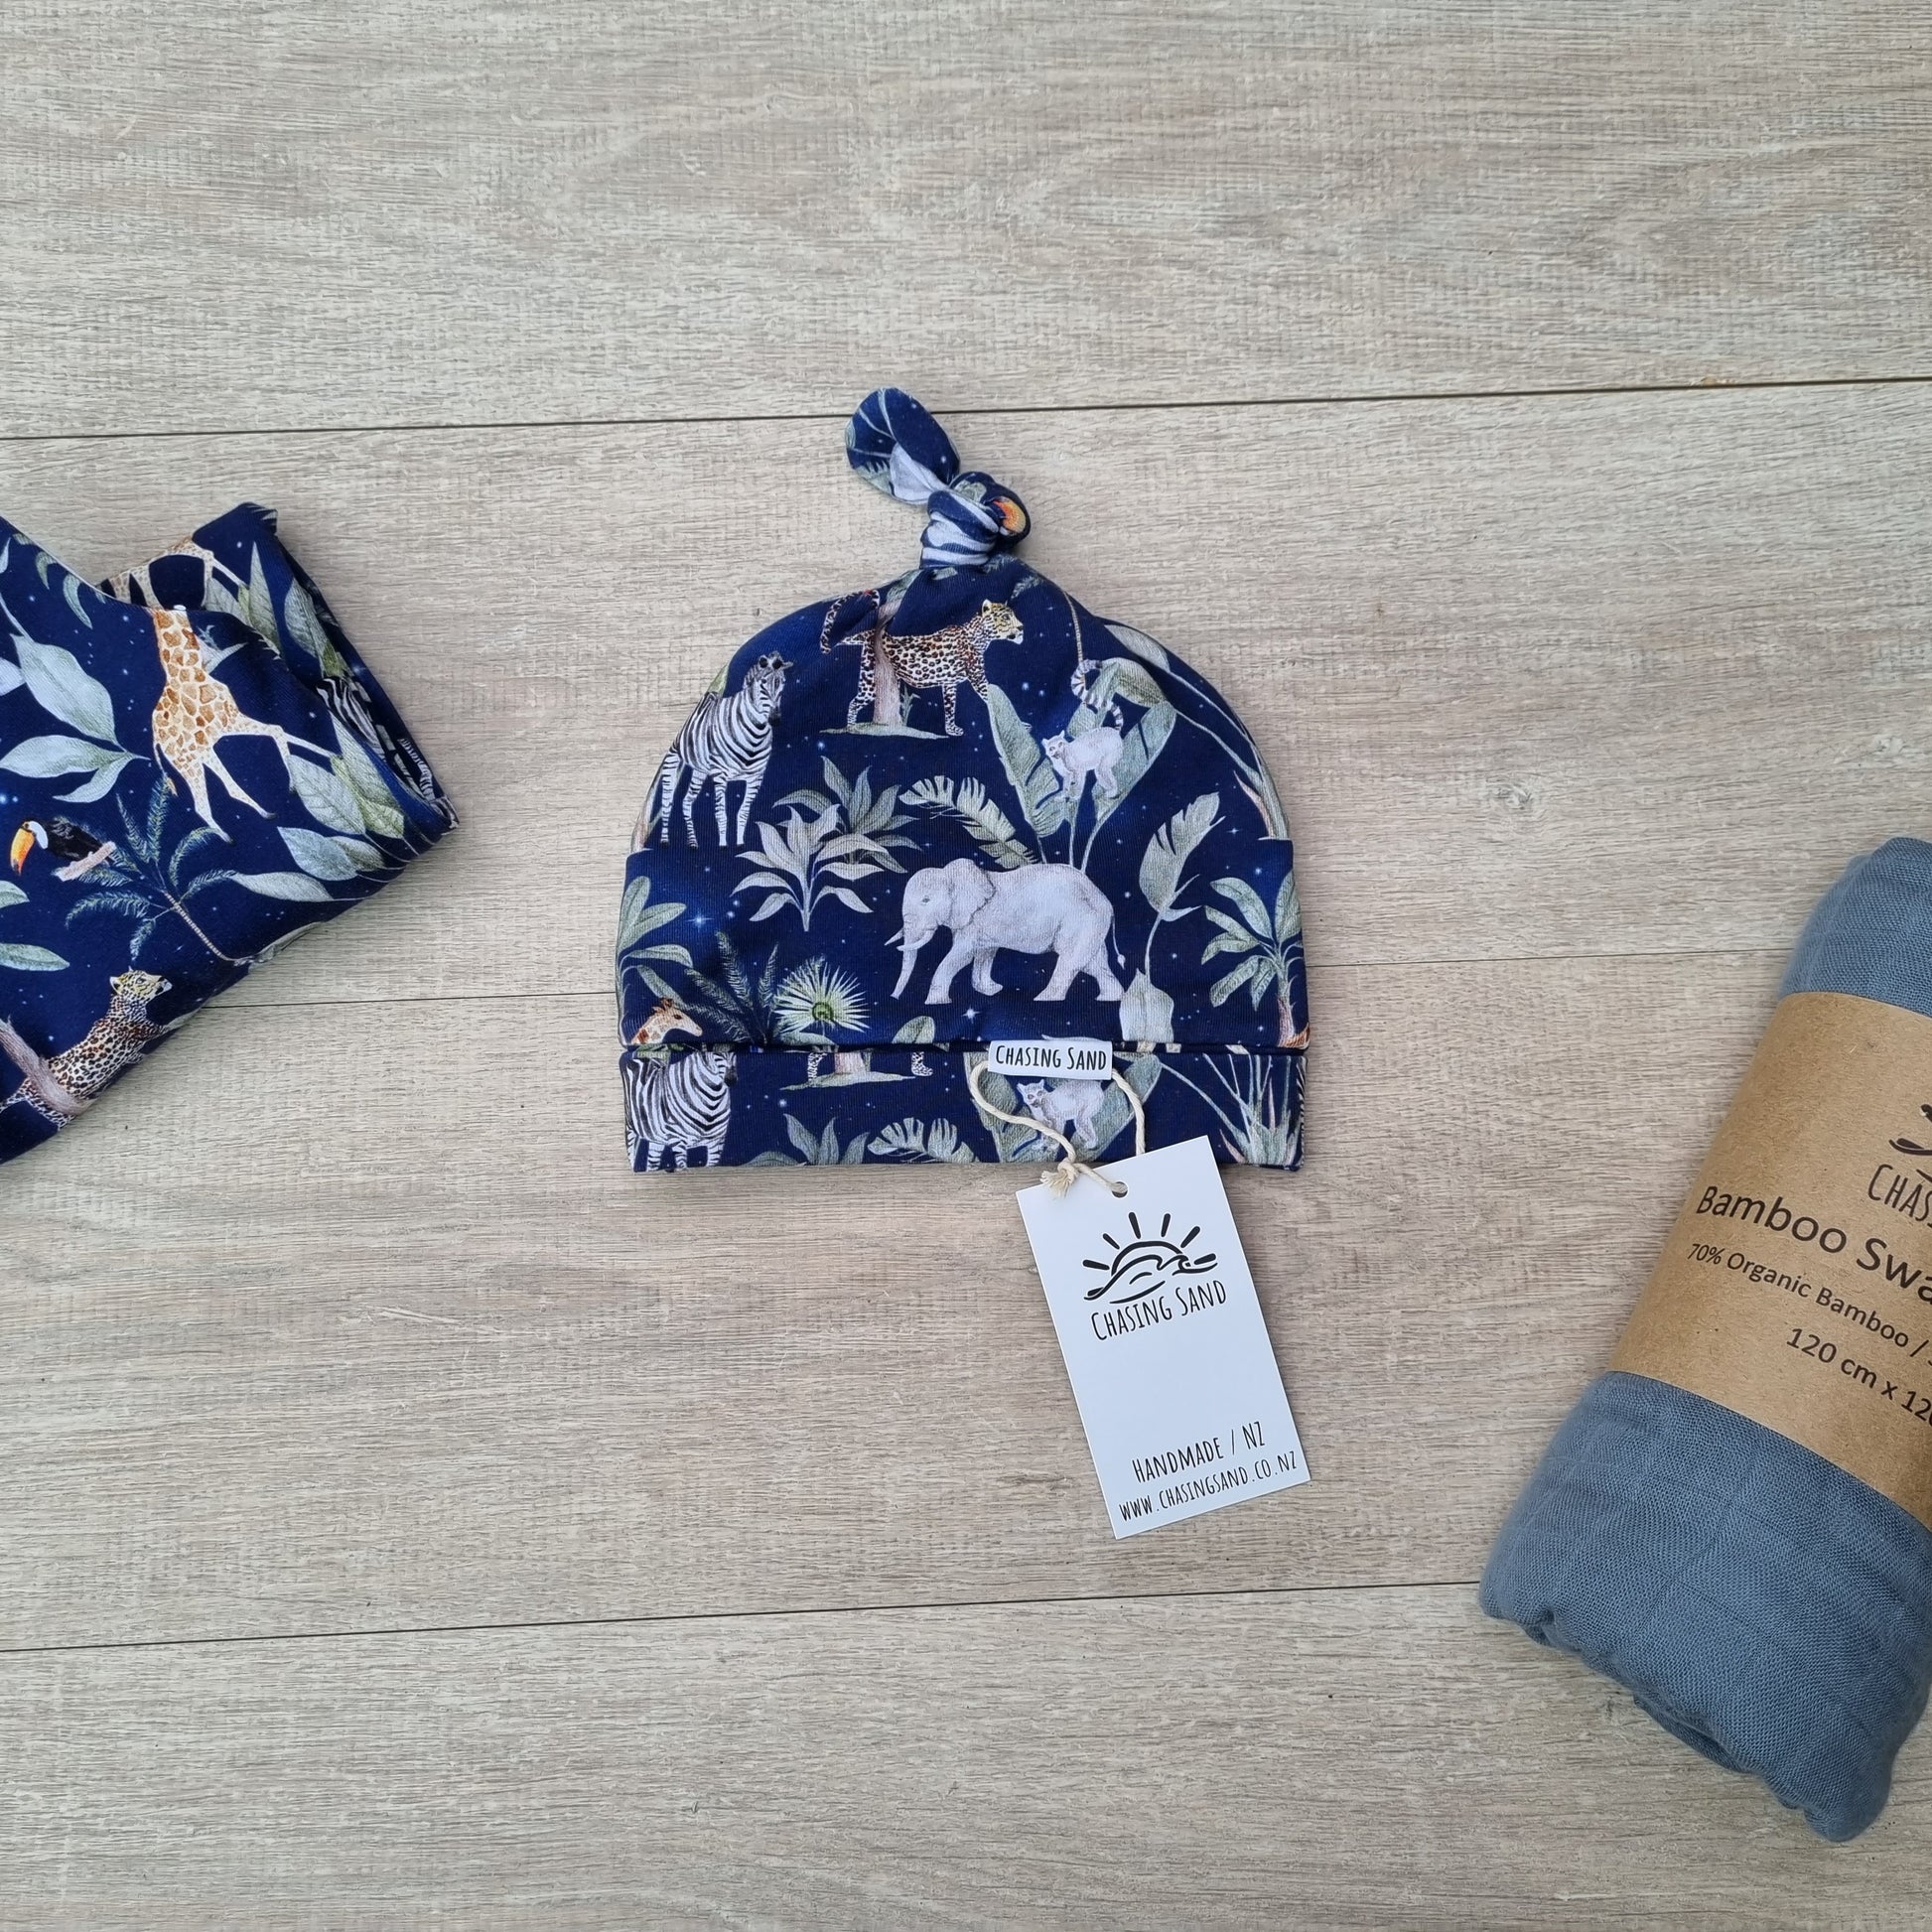 Beanie - Night Safari against wooden backdrop. African animal and plant illustrations against navy blue background.